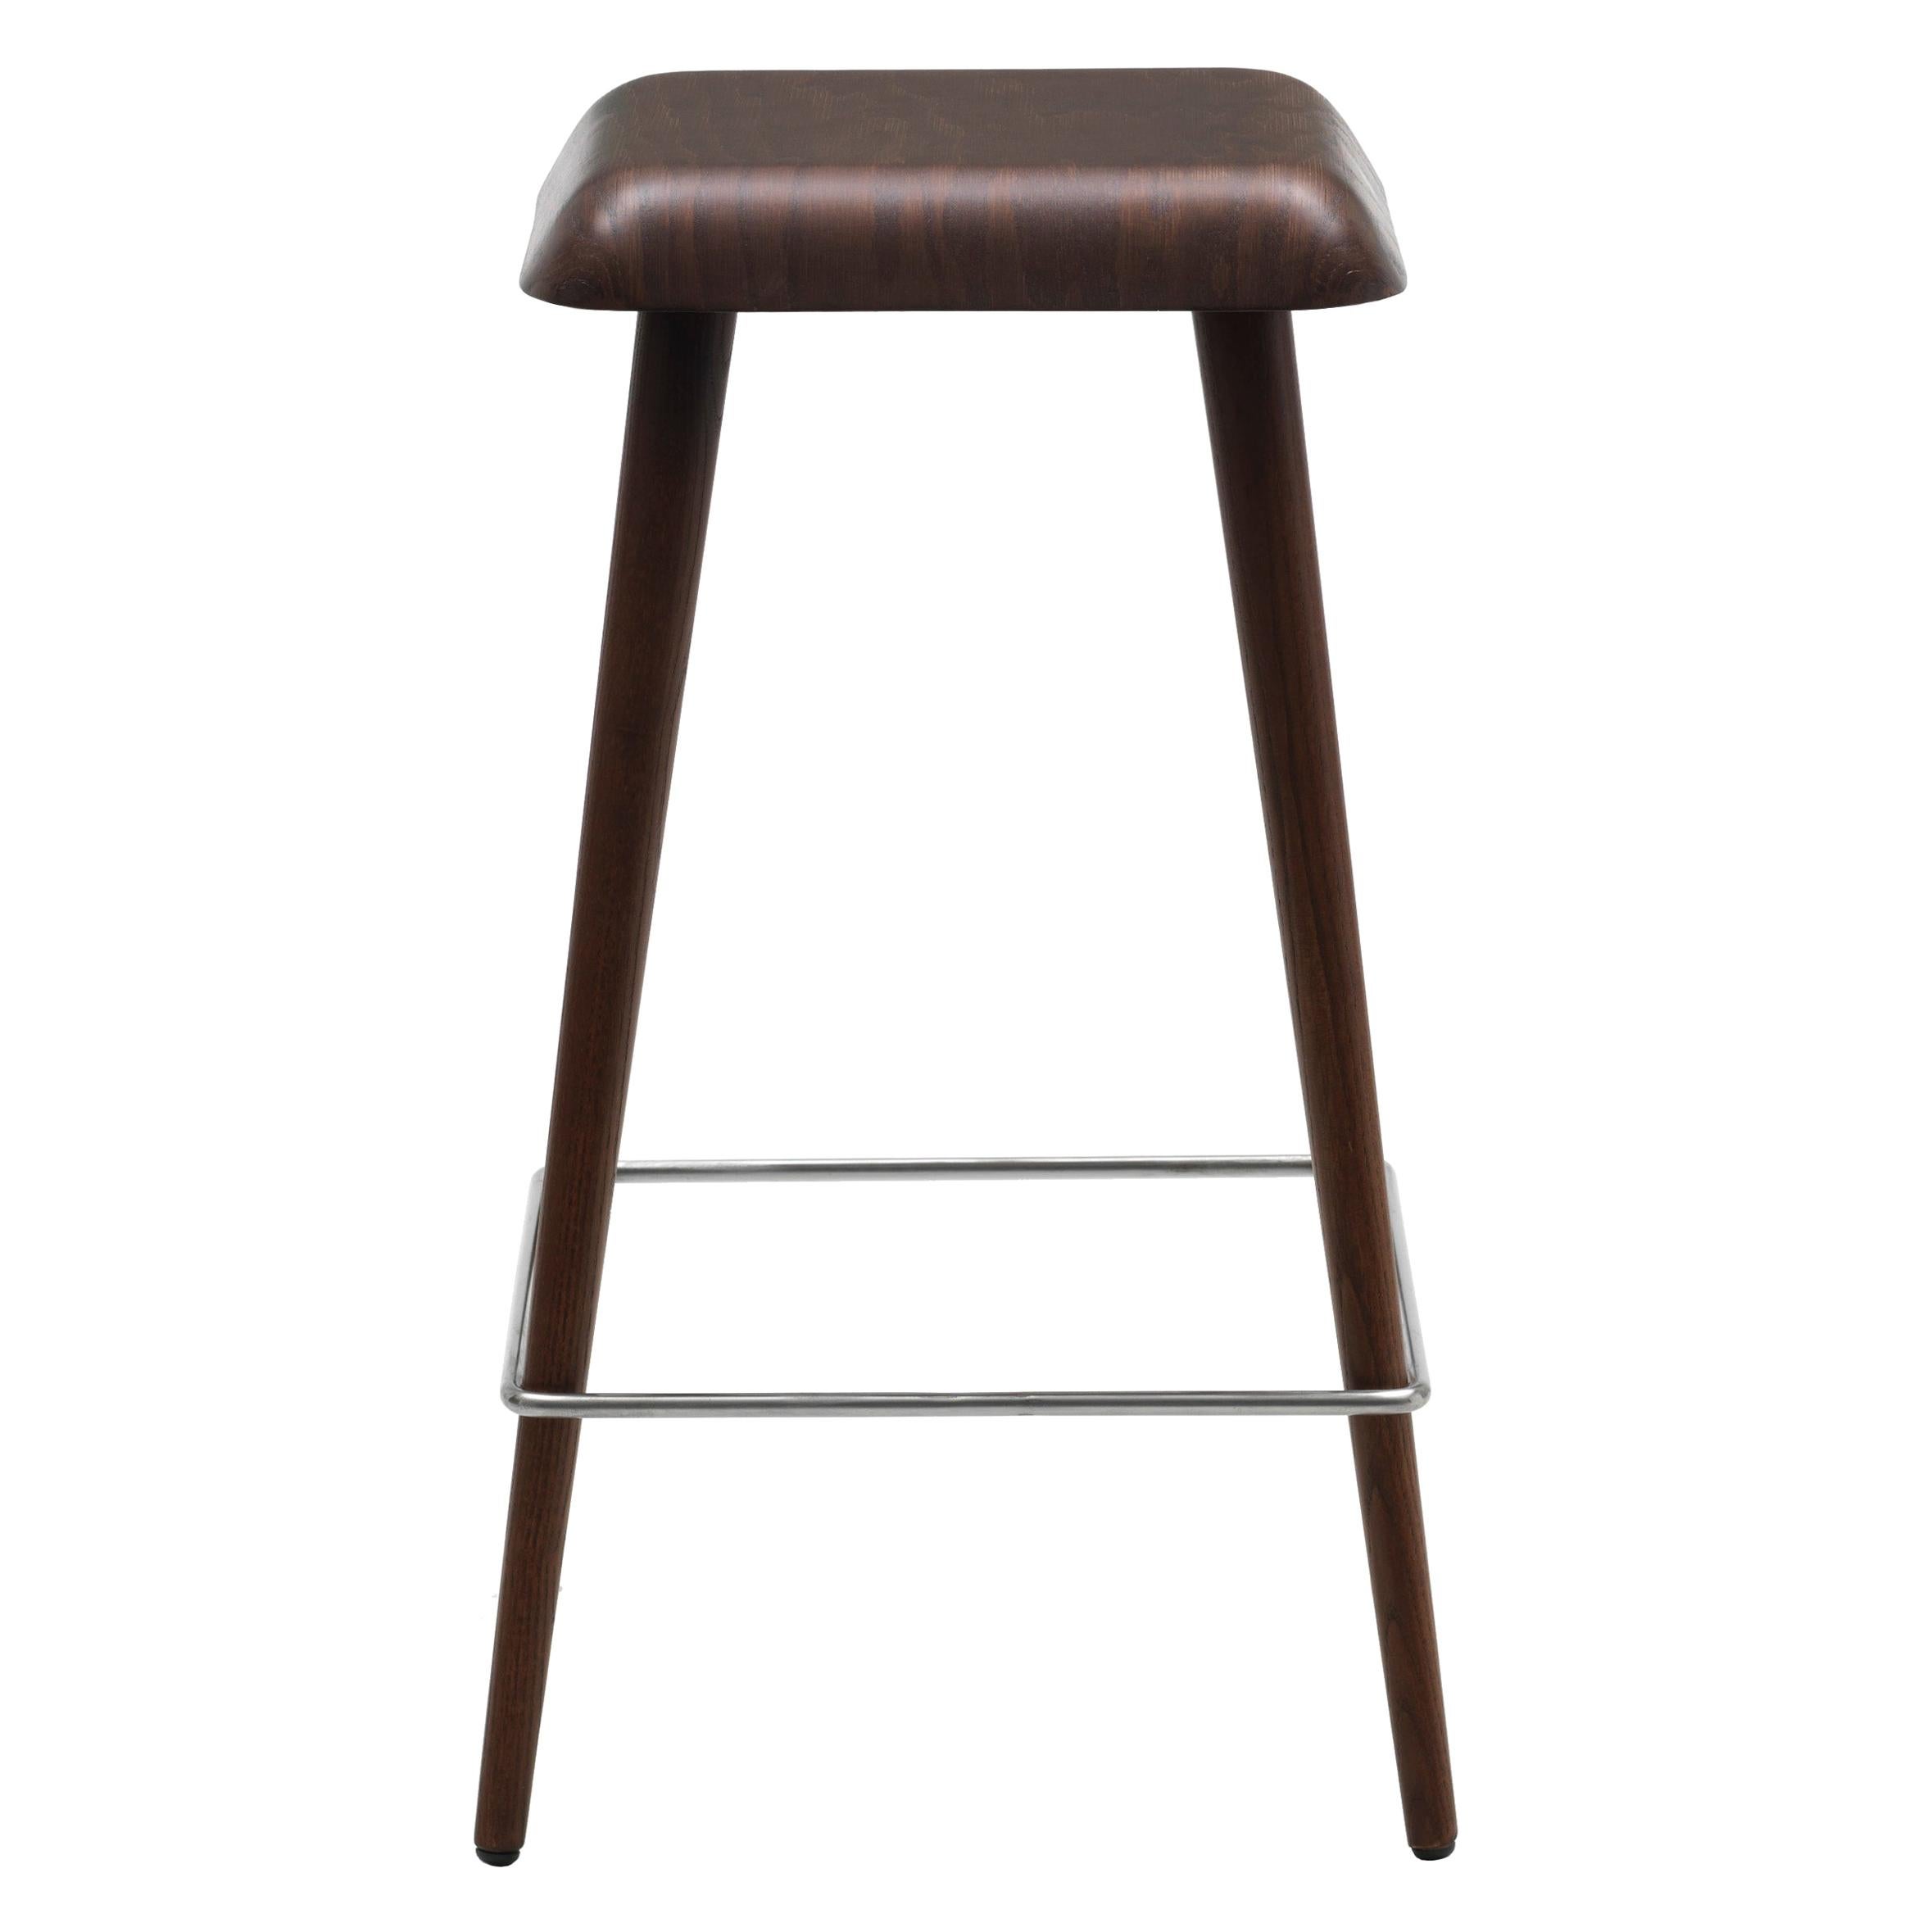 Brown (115_Wenge Stained Ash) Martin Solem Small Daddy Longlegs Stool in Solid Ashwood for Cappellini